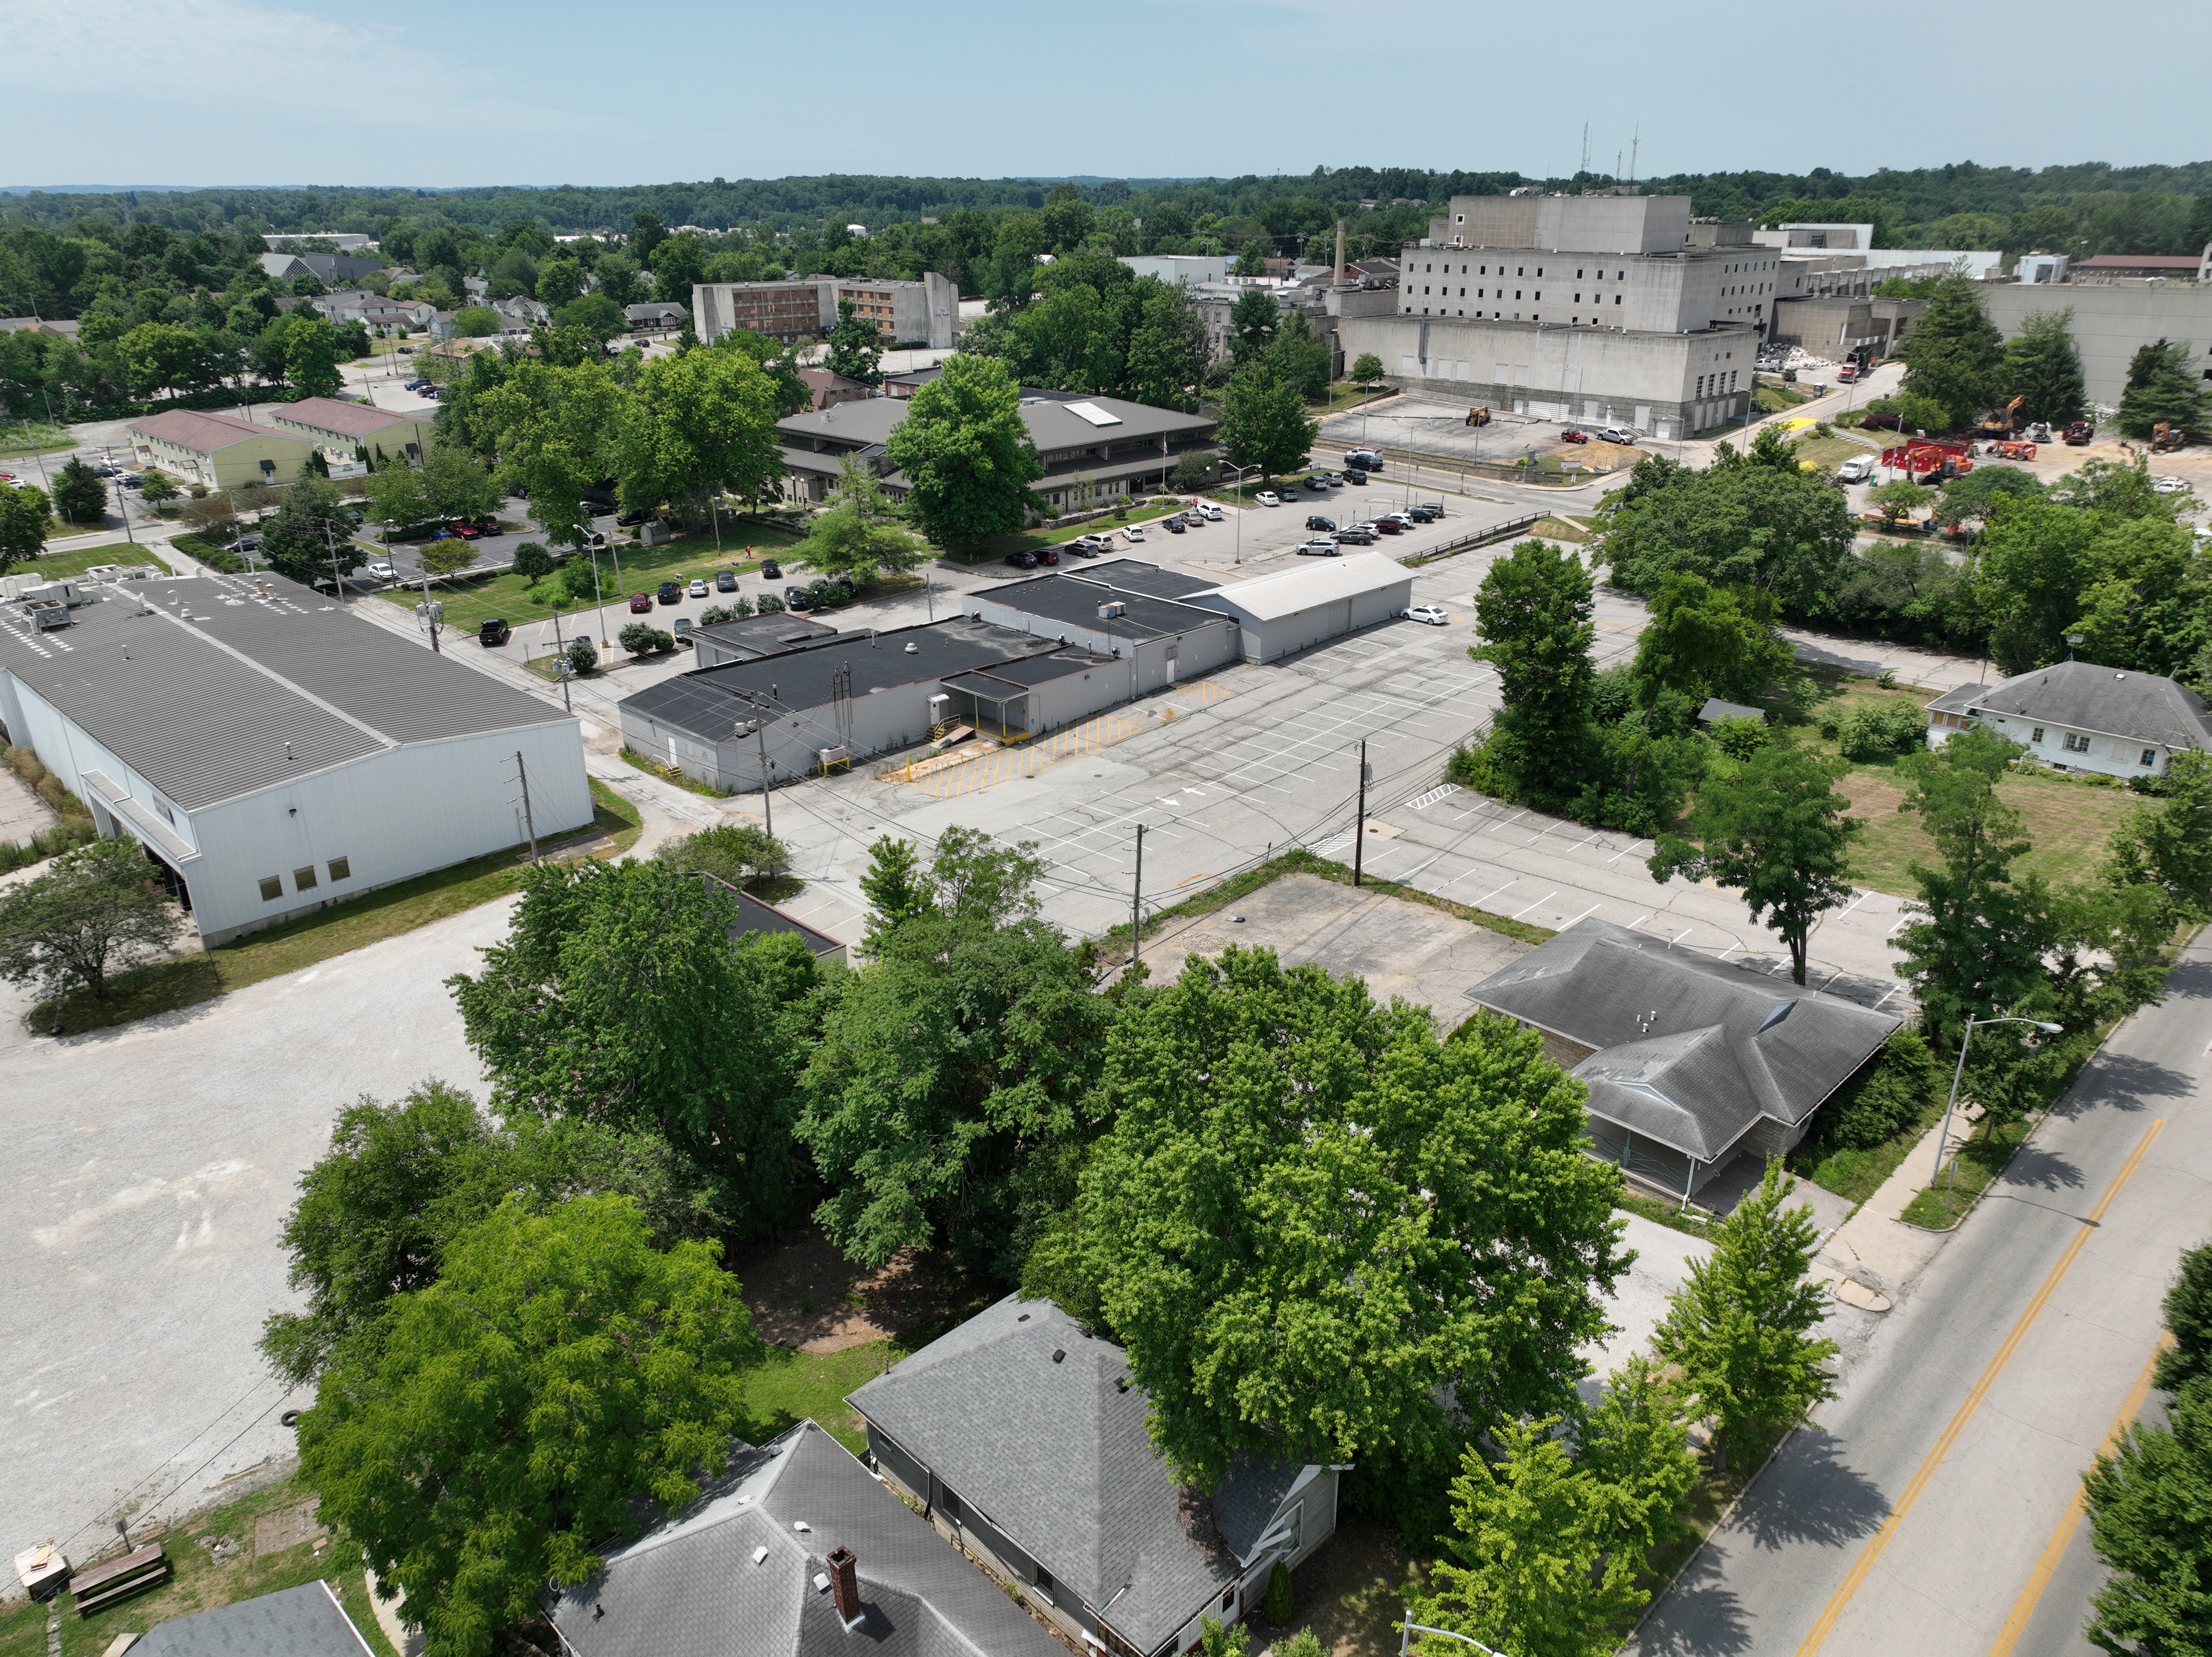 Aerial drone photo showing the development site prior to demolition. The left photo looks southwest from the intersection of 2nd and Morton Street, showing residential houses in the foreground with warehouses behind and the legacy hospital in the background. 